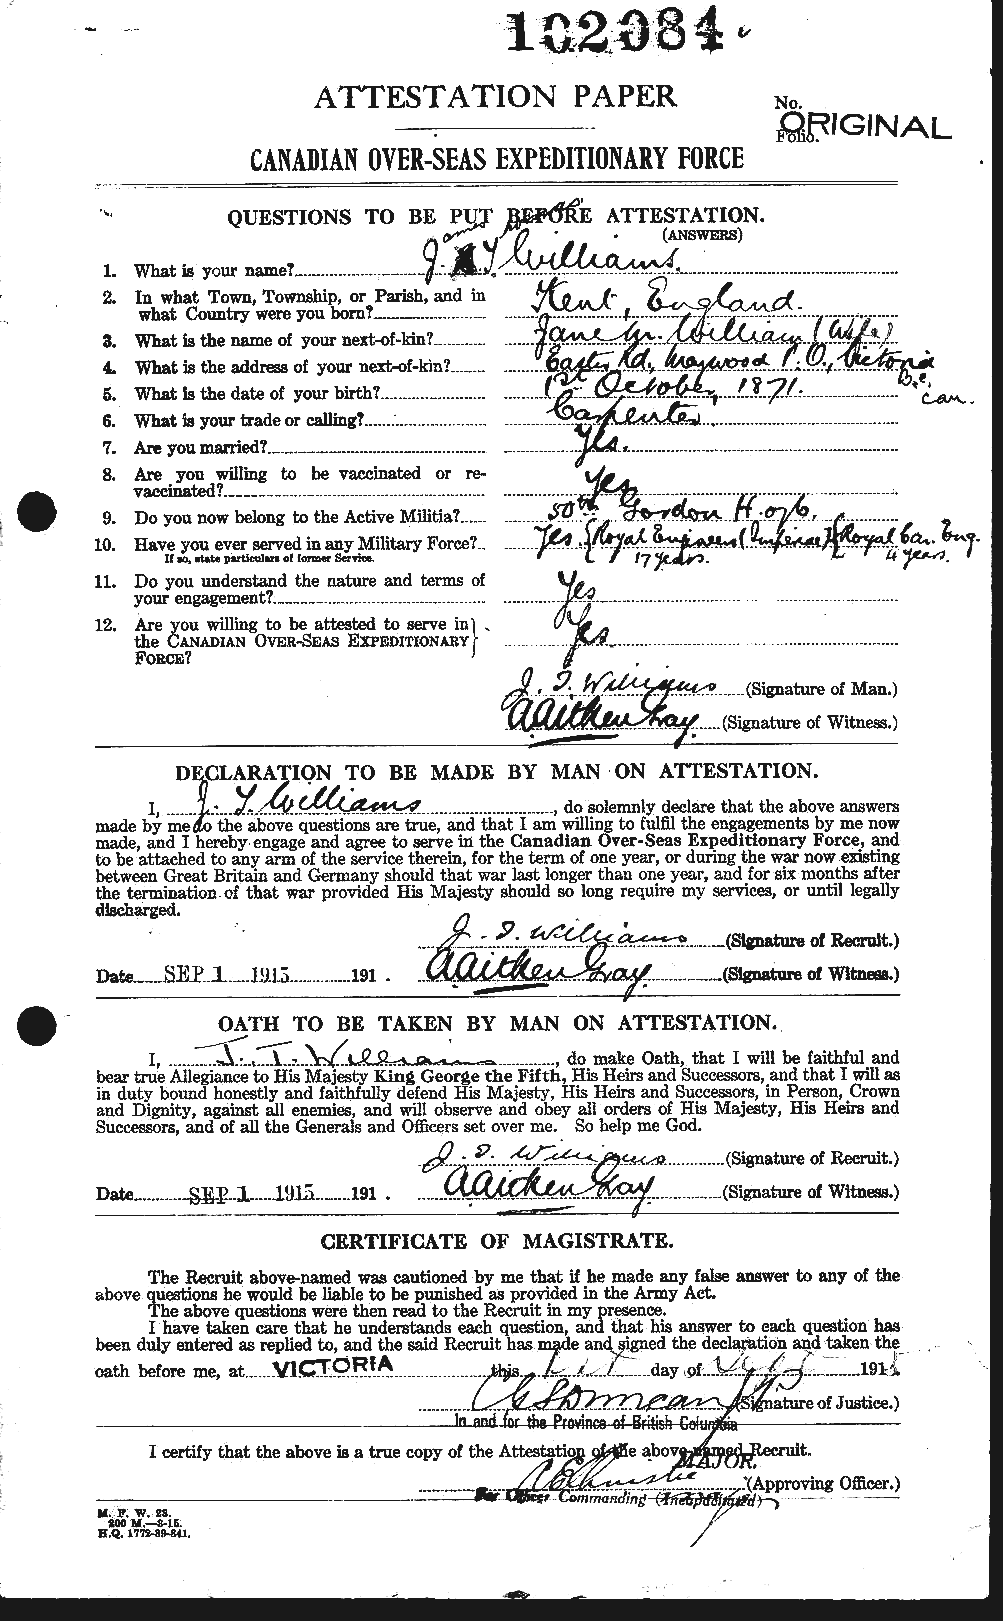 Personnel Records of the First World War - CEF 677561a